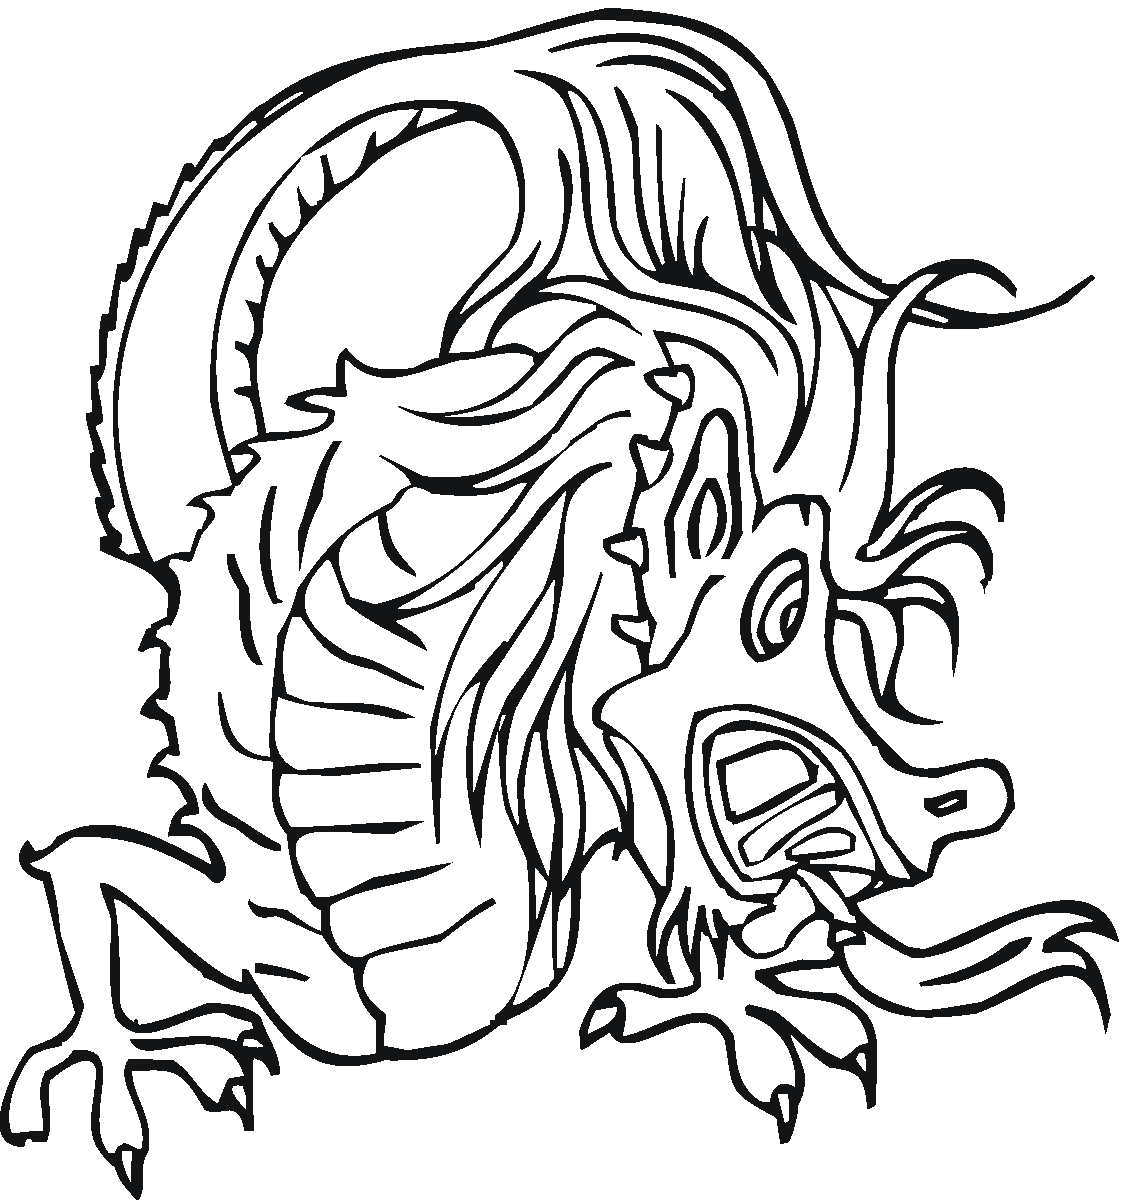 chinese dragon colouring page free printable chinese dragon coloring pages for kids dragon colouring page chinese 